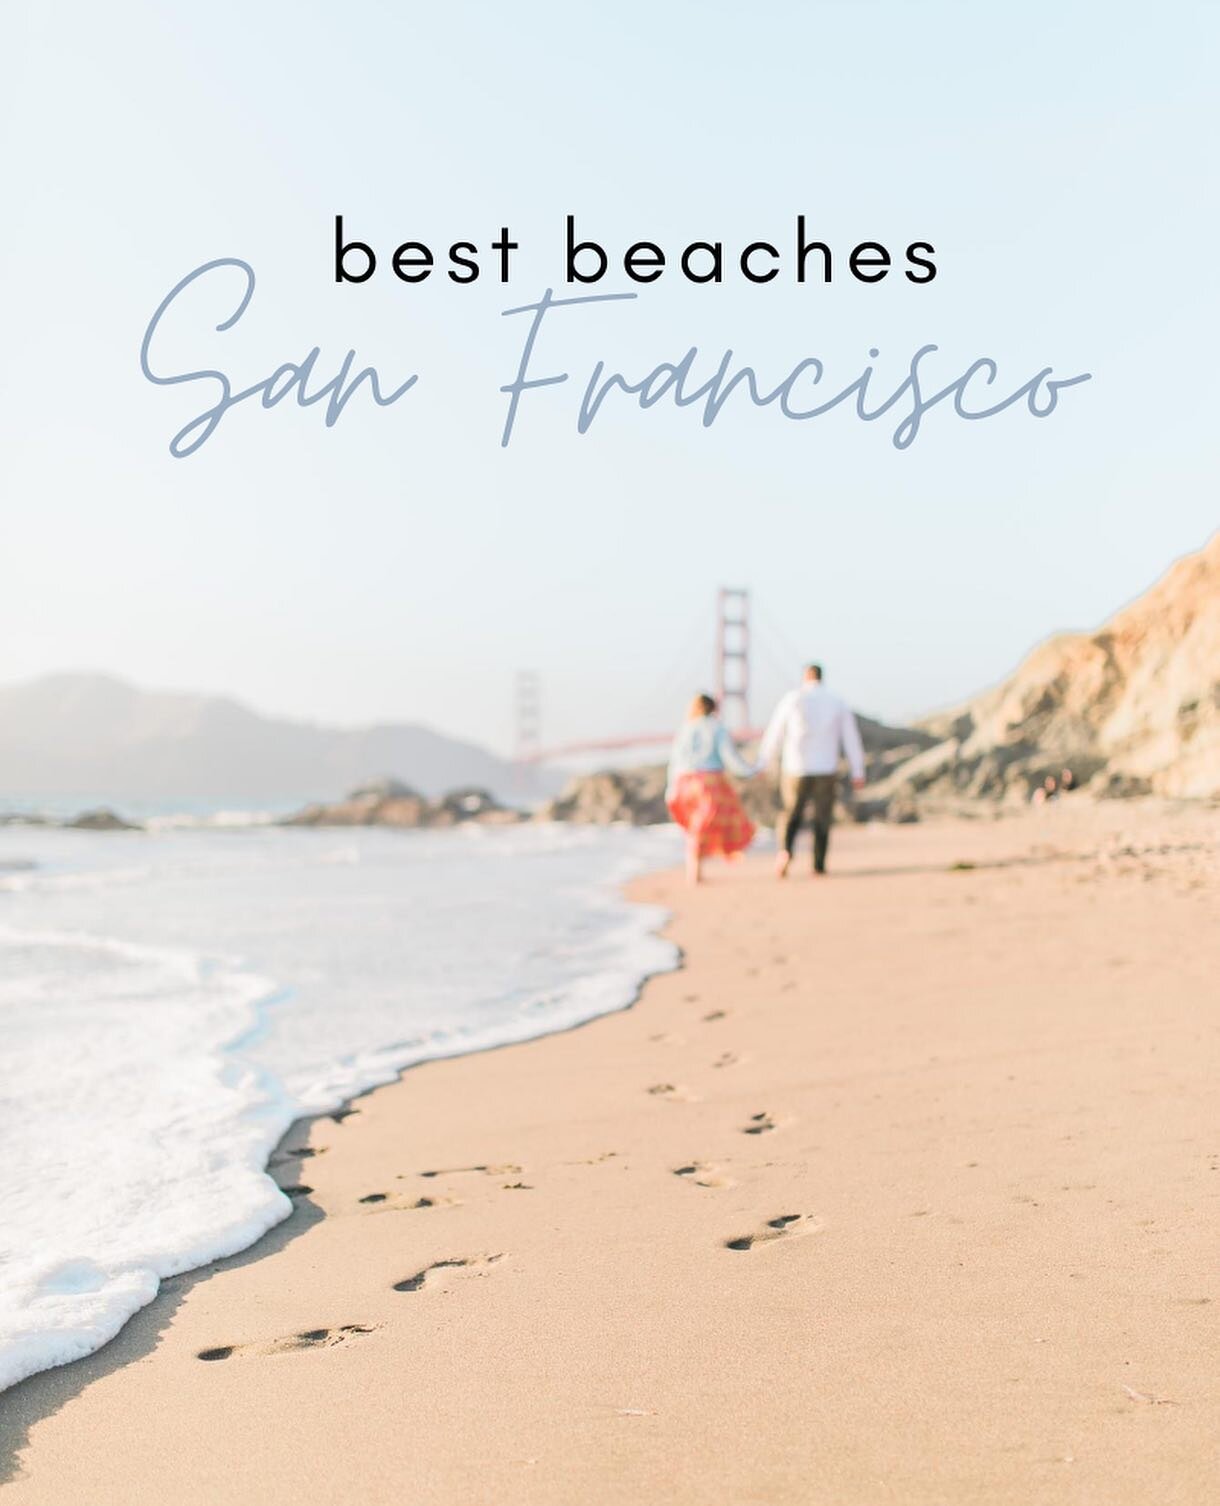 The best beaches for photos in San Francisco:⁠

#1 Baker Beach, with Golden Gate Bridge views, this is by far the most requested beach in San Francisco for photos

#2 Ocean Beach, the dunes at Ocean Beach are extraordinarily beautiful in any lighting